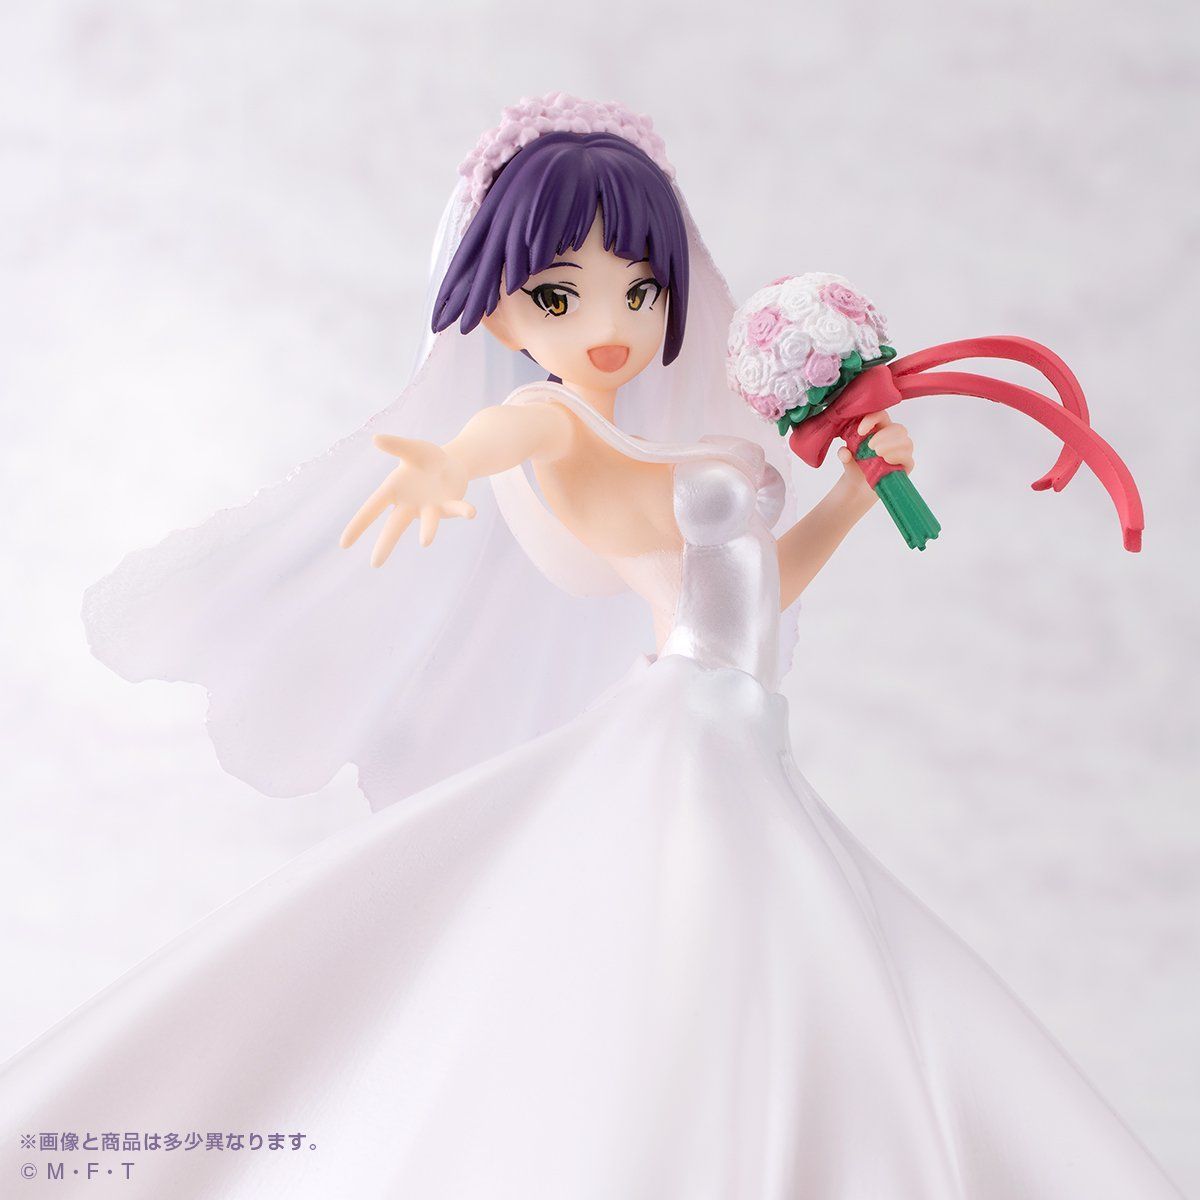 New [GeGeGe no Kitaro] erotic figure to undress even clothes in the erotic wedding dress of the cat daughter! 3